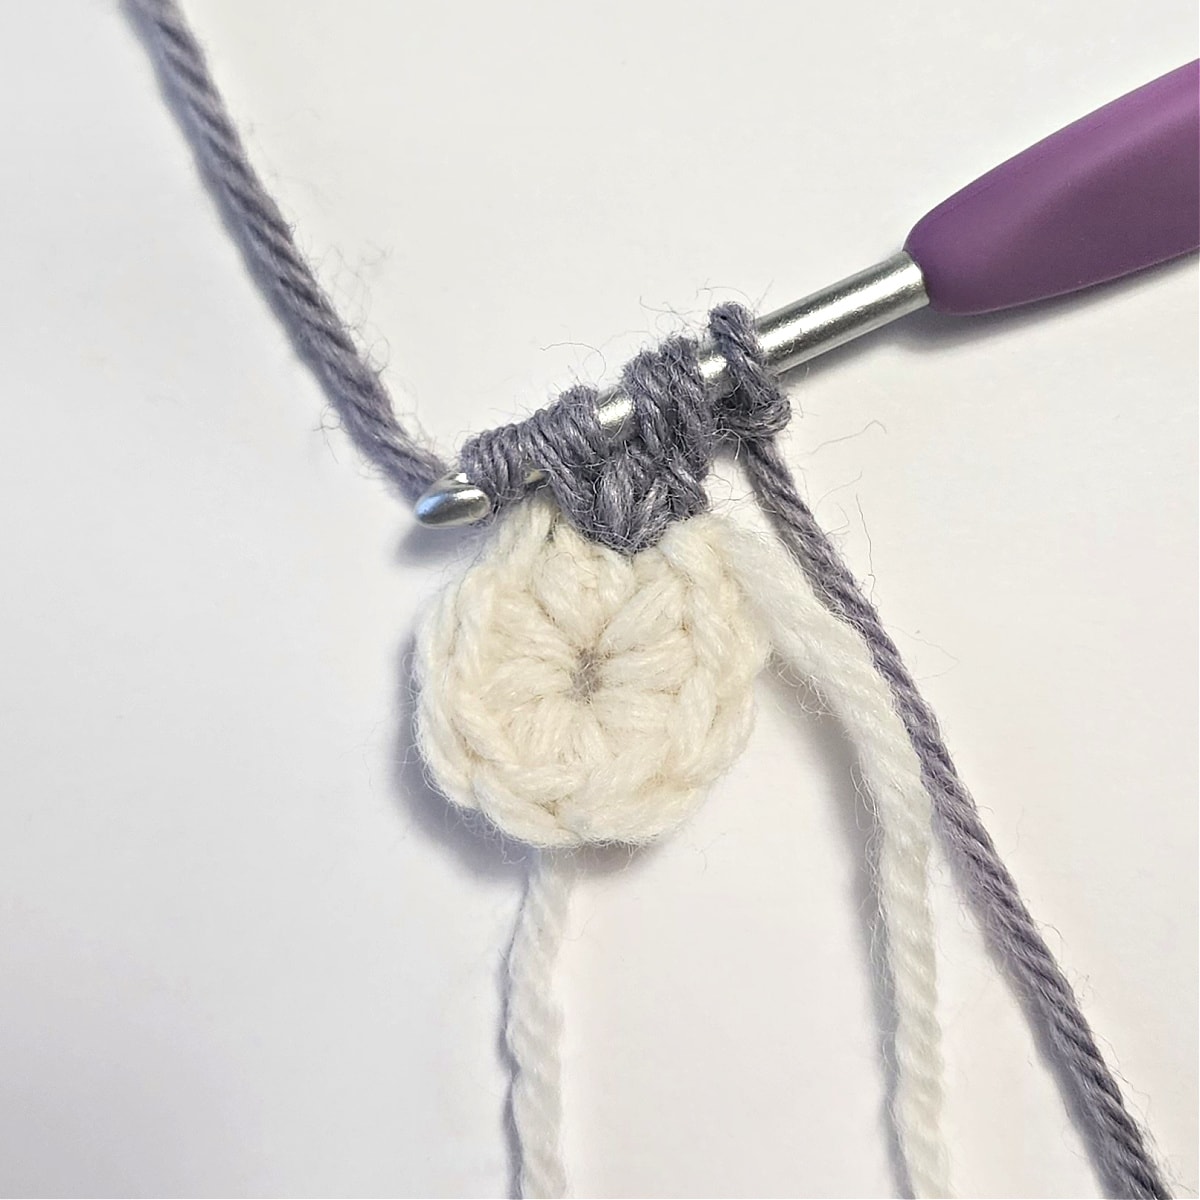 Small crochet swatch with a crochet cluster stitch being worked.